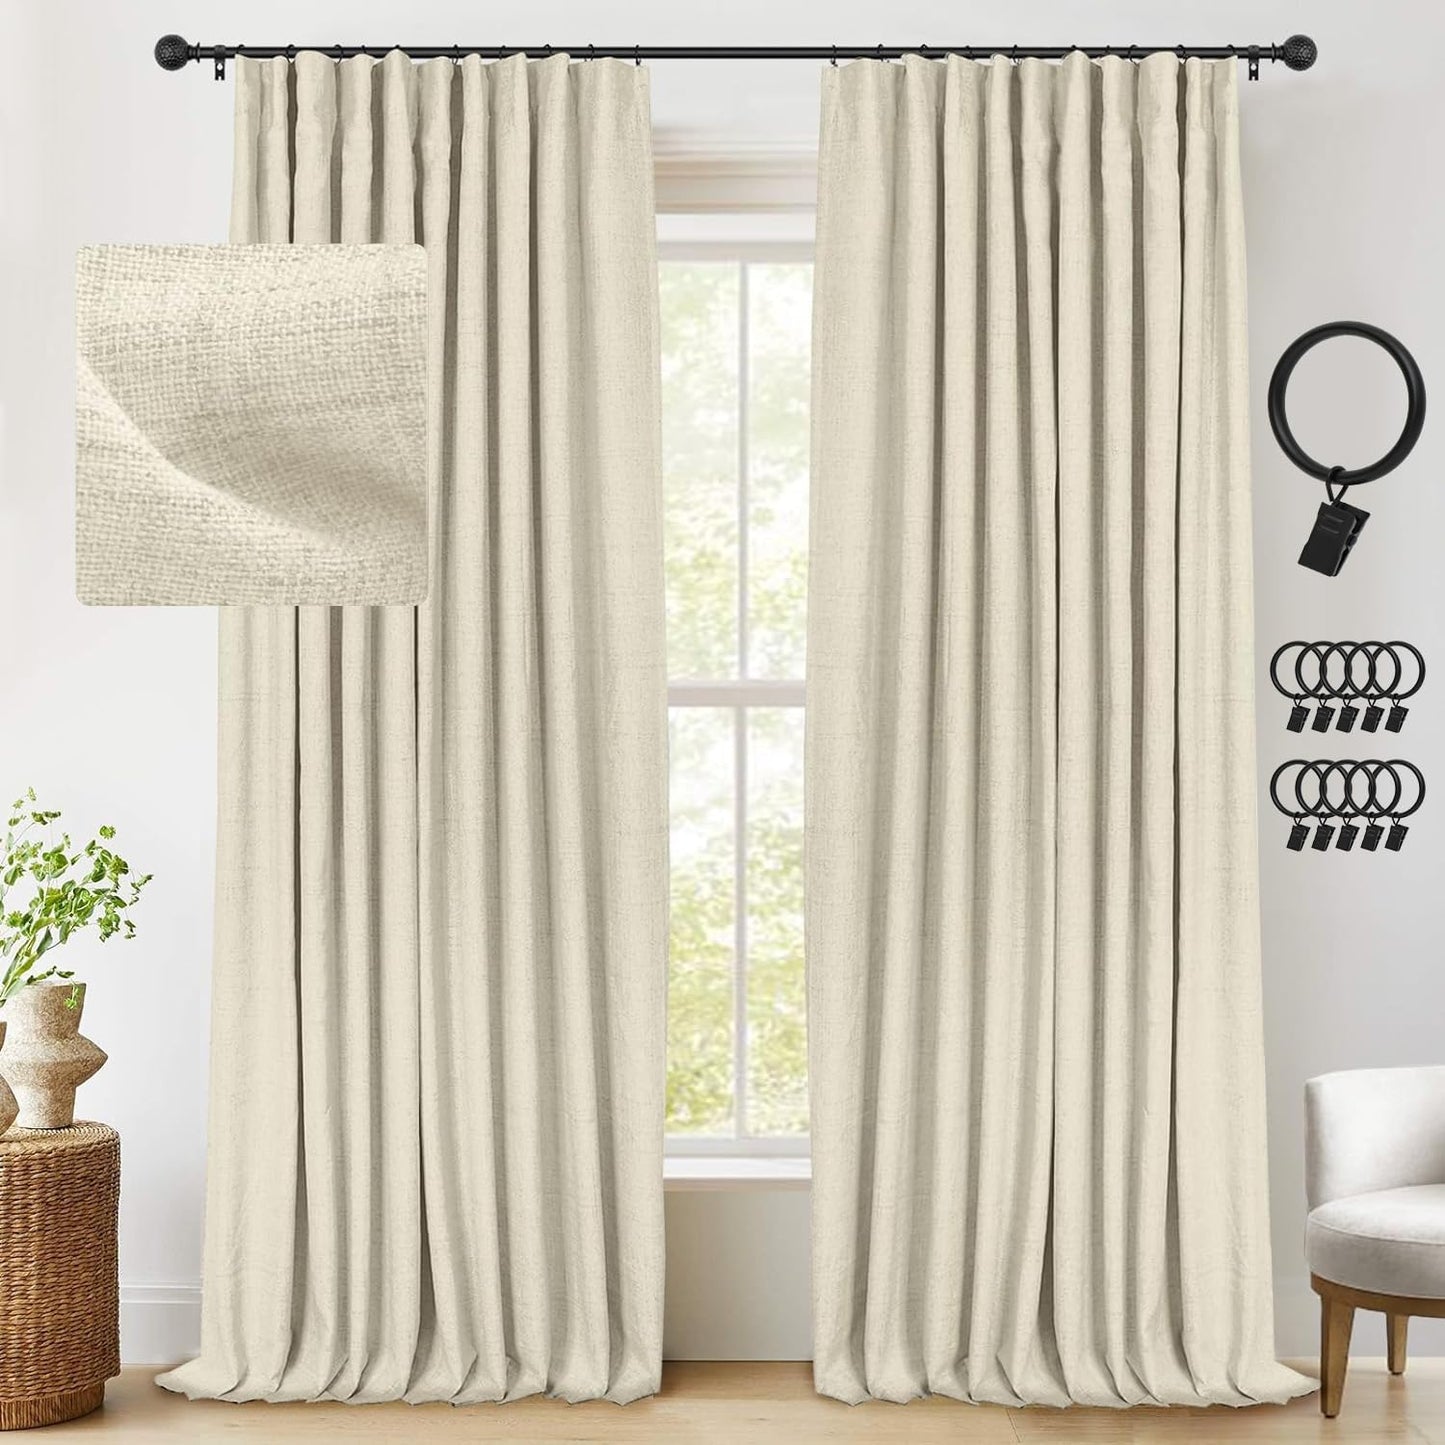 INOVADAY Linen Blackout Curtains 96 Inches Long, Thermal Insulated Black Out Curtains & Drapes for Living Room Bedroom (W50 X L96 1 Panels, Beige)  INOVADAY Natural Flax 50"W X 96"L 